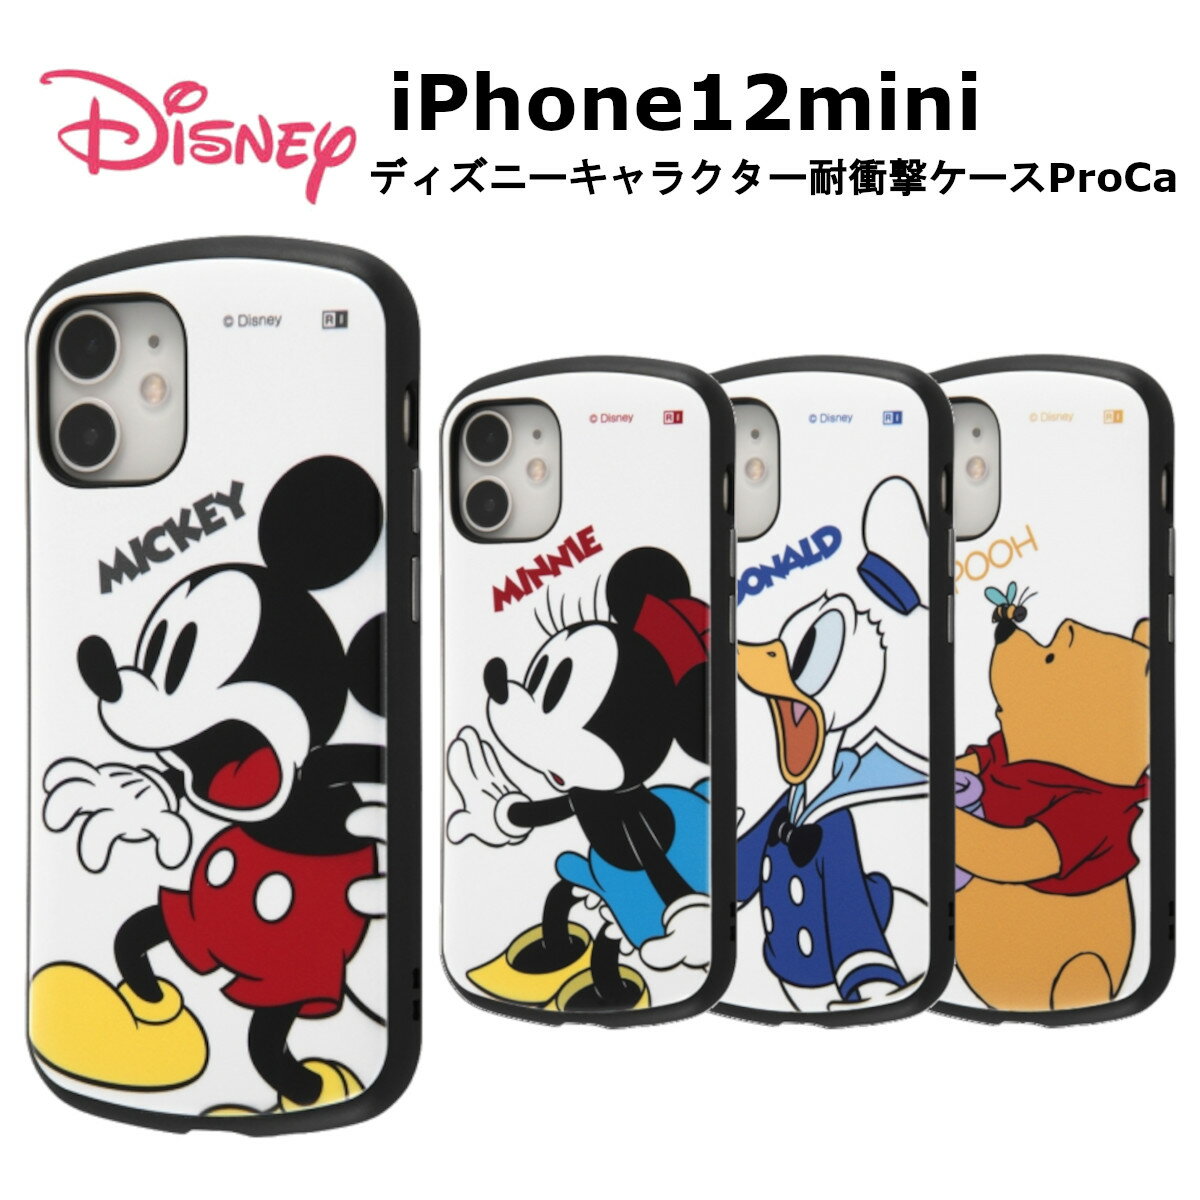 iPhone 12 mini [J[i fBYj[ LN^[ ϏՌP[X ProCa ~bL[}EX ~j[}EX hih_bN v[ iPhone12mini ACtH12~j ACz12~j ϏՌP[X gуP[X